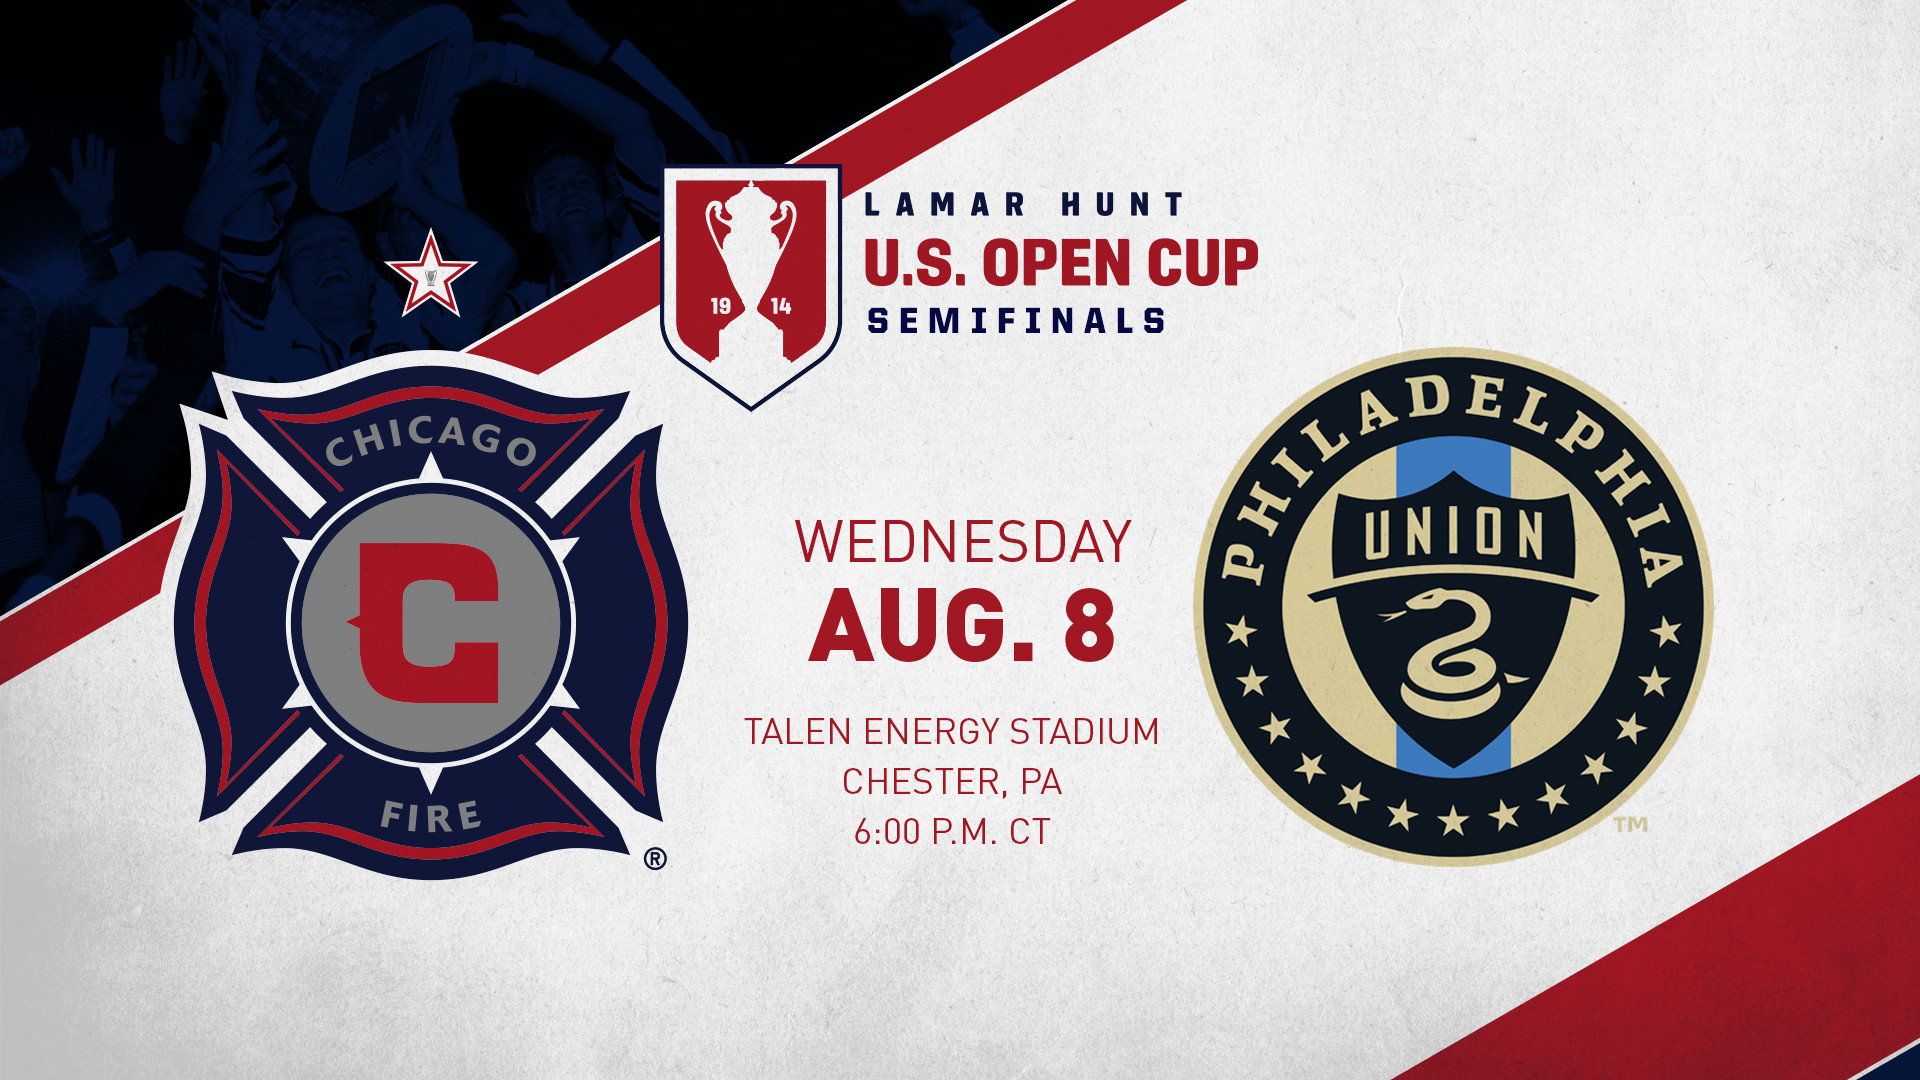 1920x1080 Chicago Fire to travel to Philadelphia Union for 2018 Lamar Hunt U.S. Open  Cup Semifinals, receive top priority to host Final